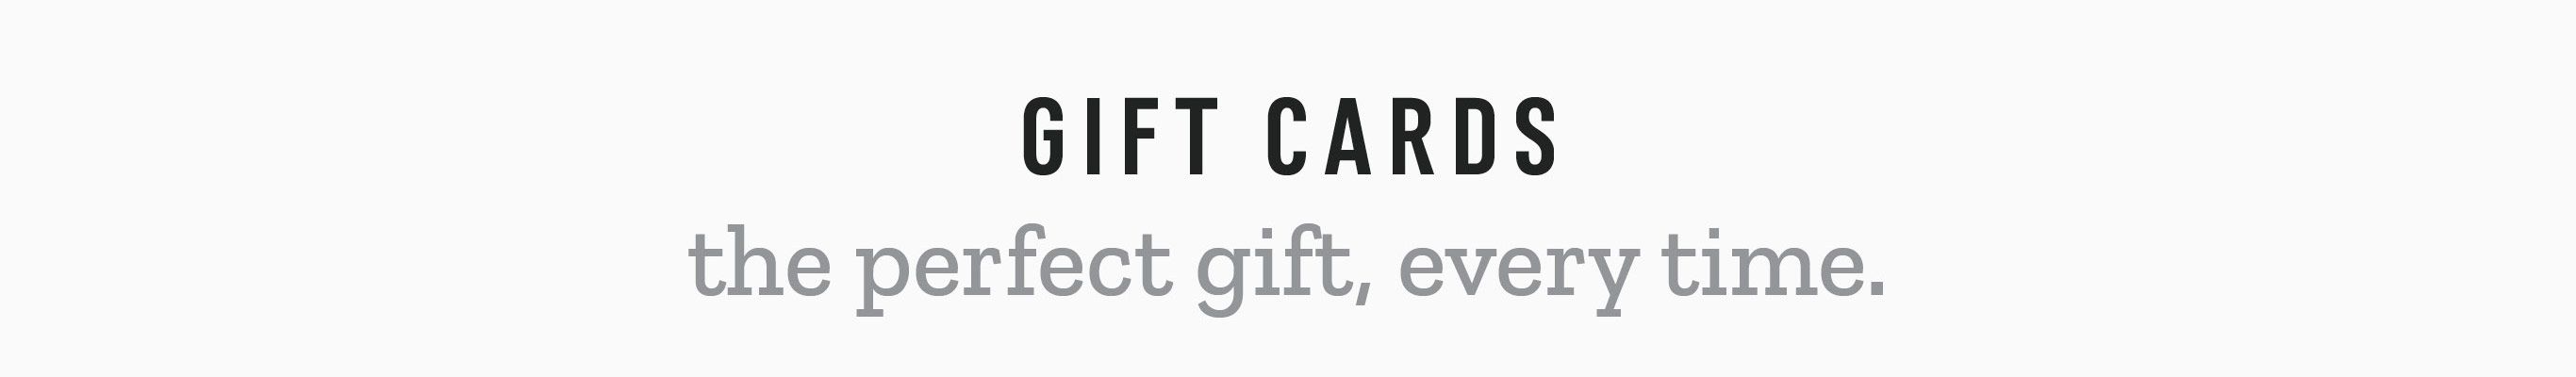 Gift Cards. The perfect gift, everytime.